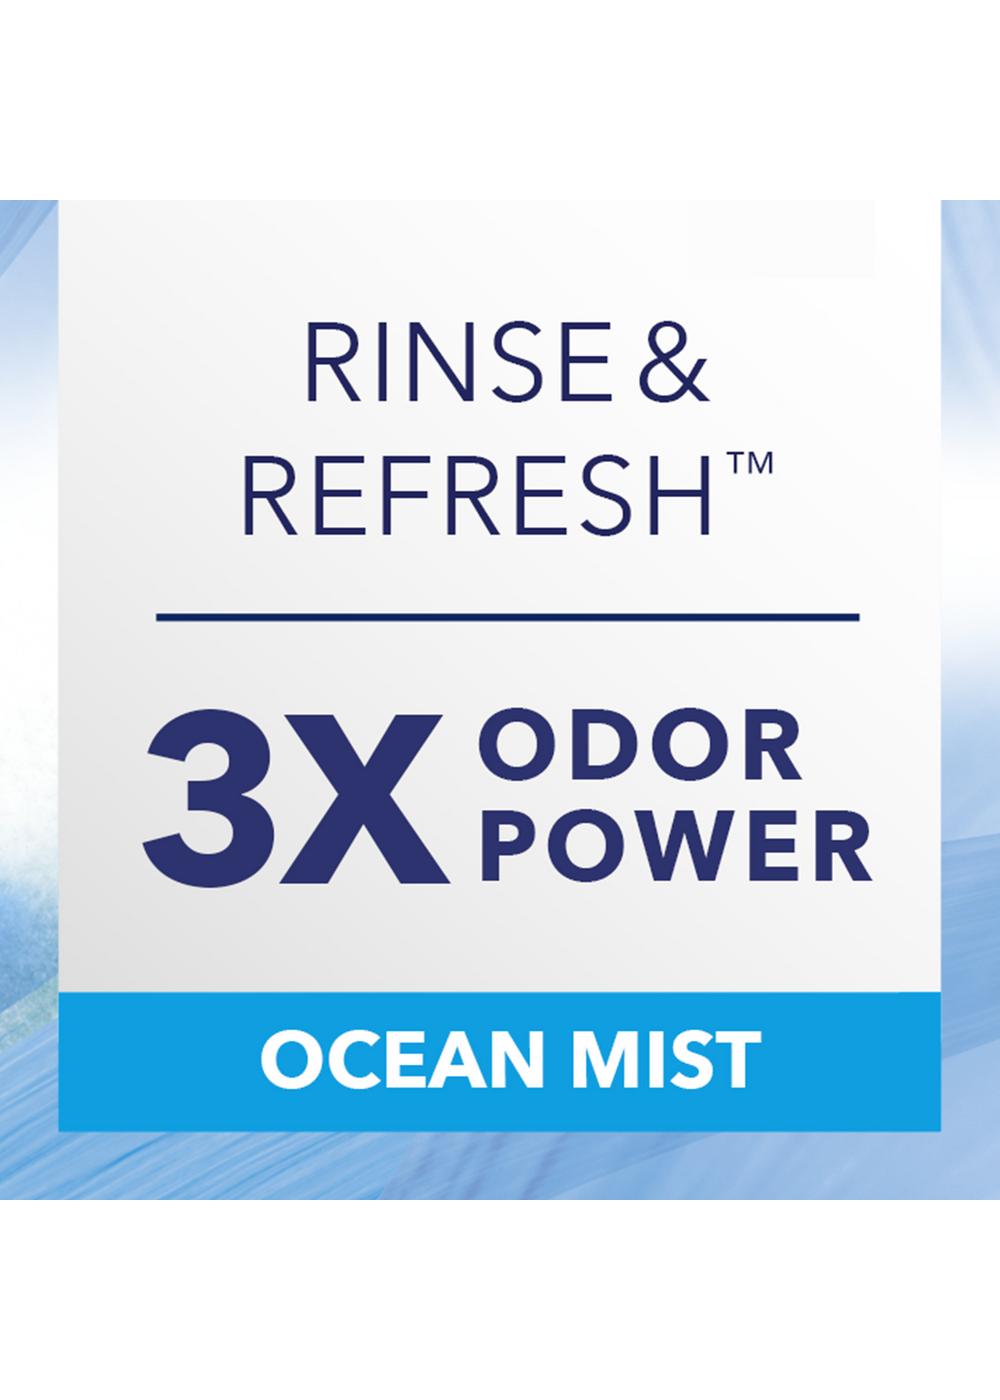 Downy Rinse & Refresh Laundry Odor Remover, 37 Loads - Ocean Mist; image 10 of 10